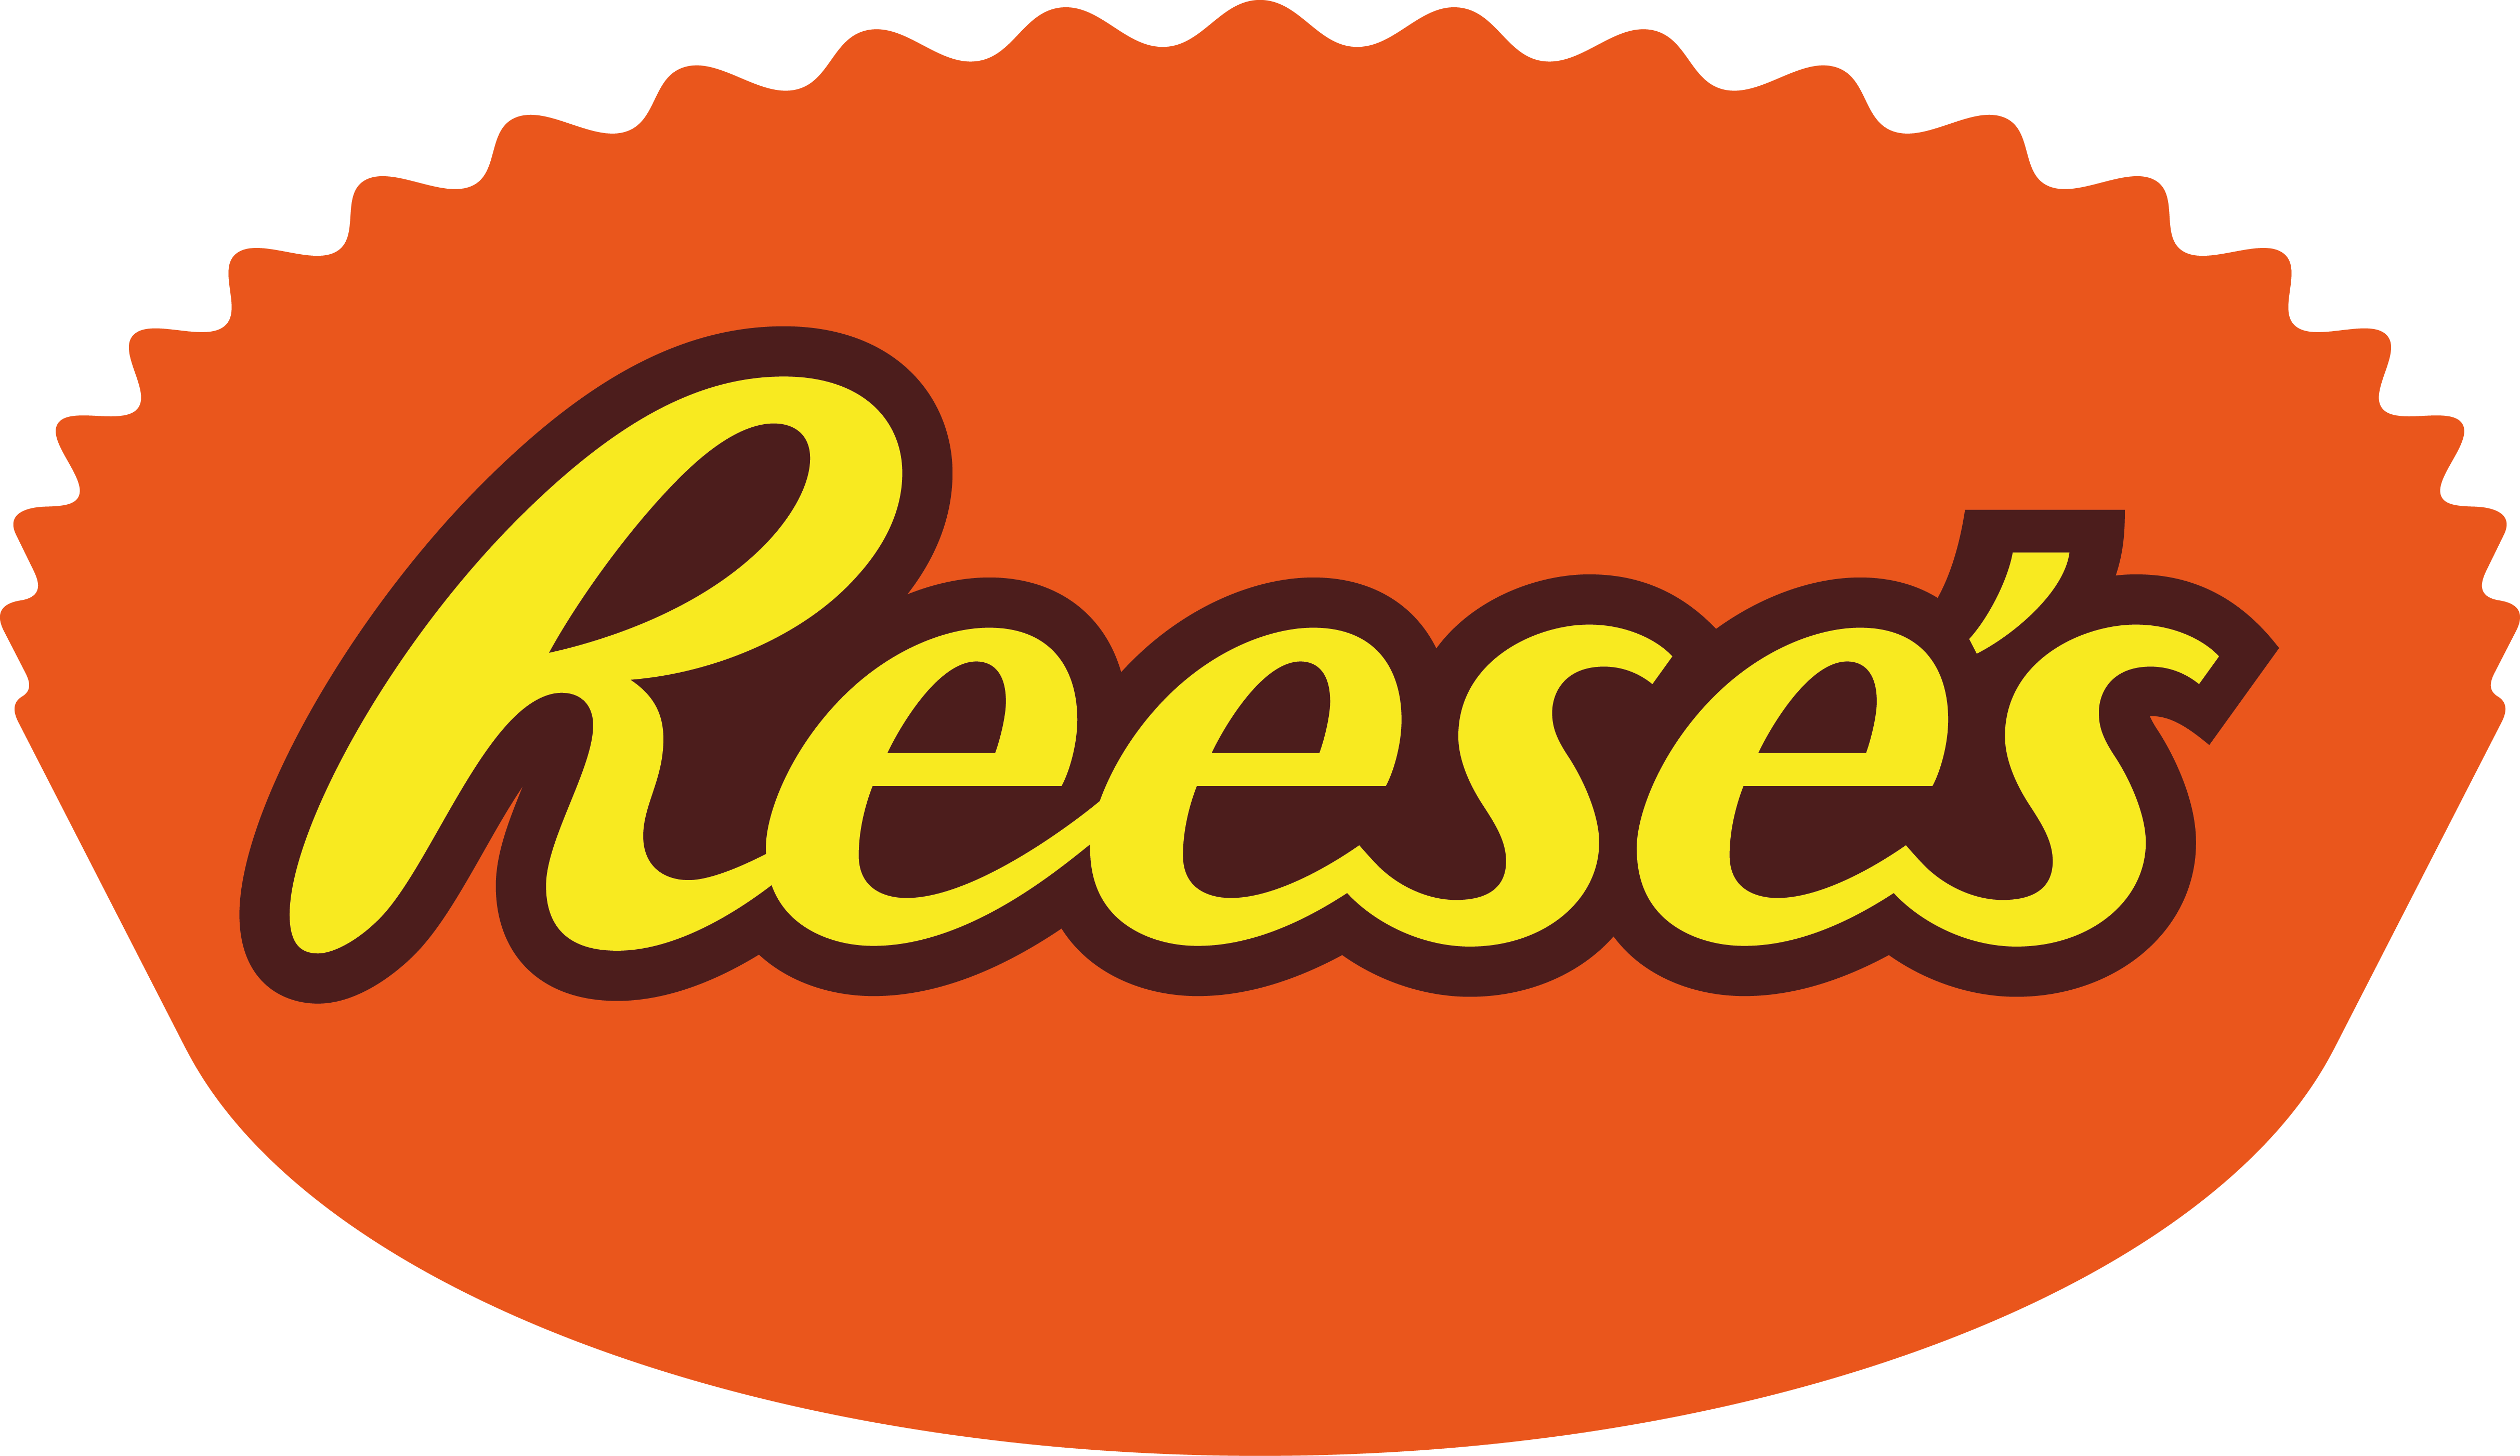 Reese's Peanut Butter Cups (4847x2801)